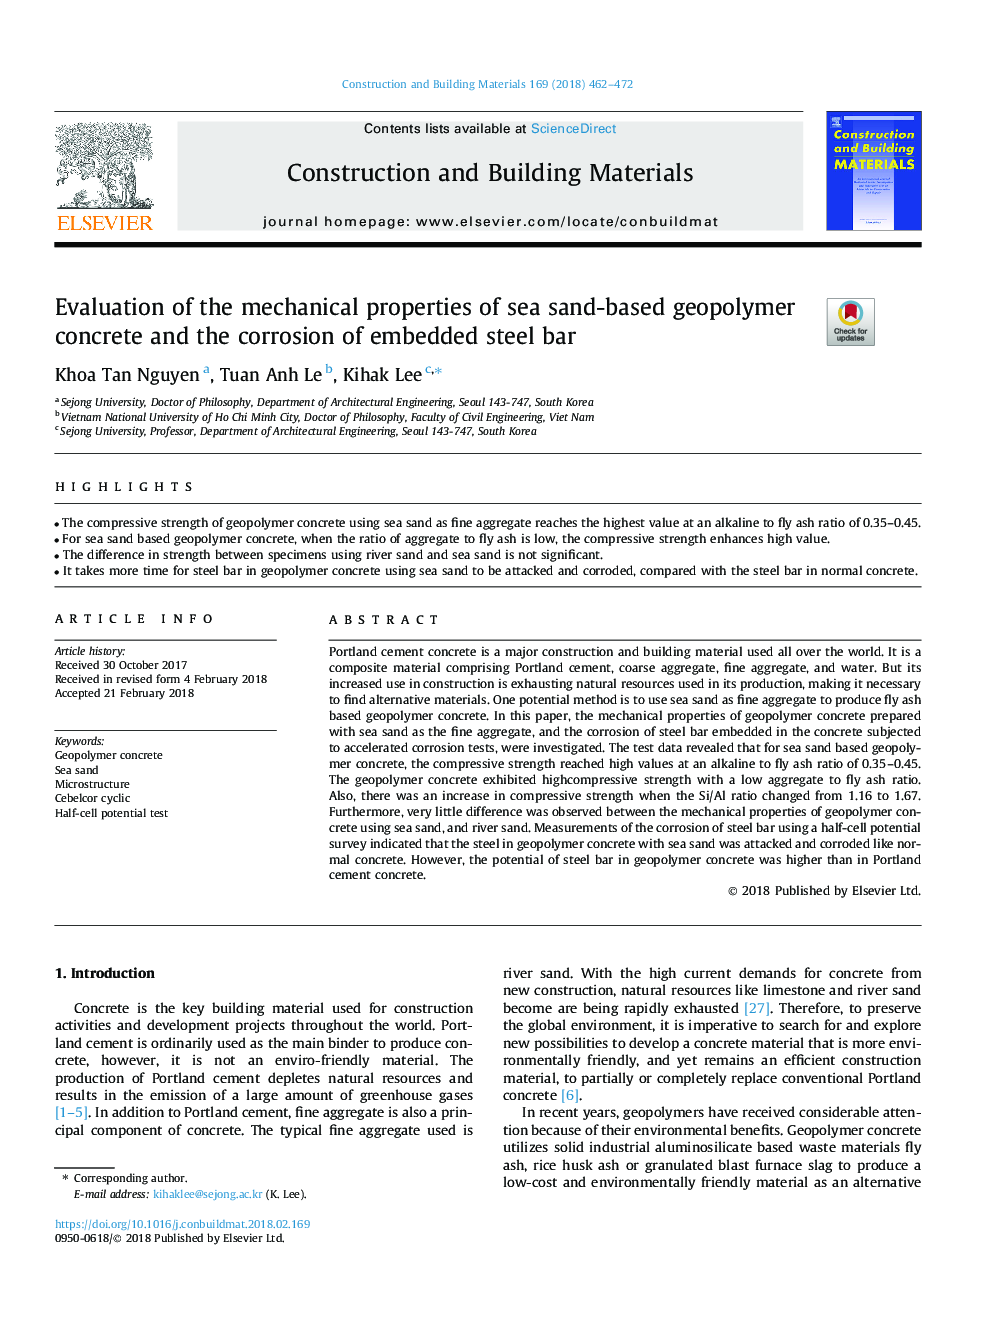 Evaluation of the mechanical properties of sea sand-based geopolymer concrete and the corrosion of embedded steel bar